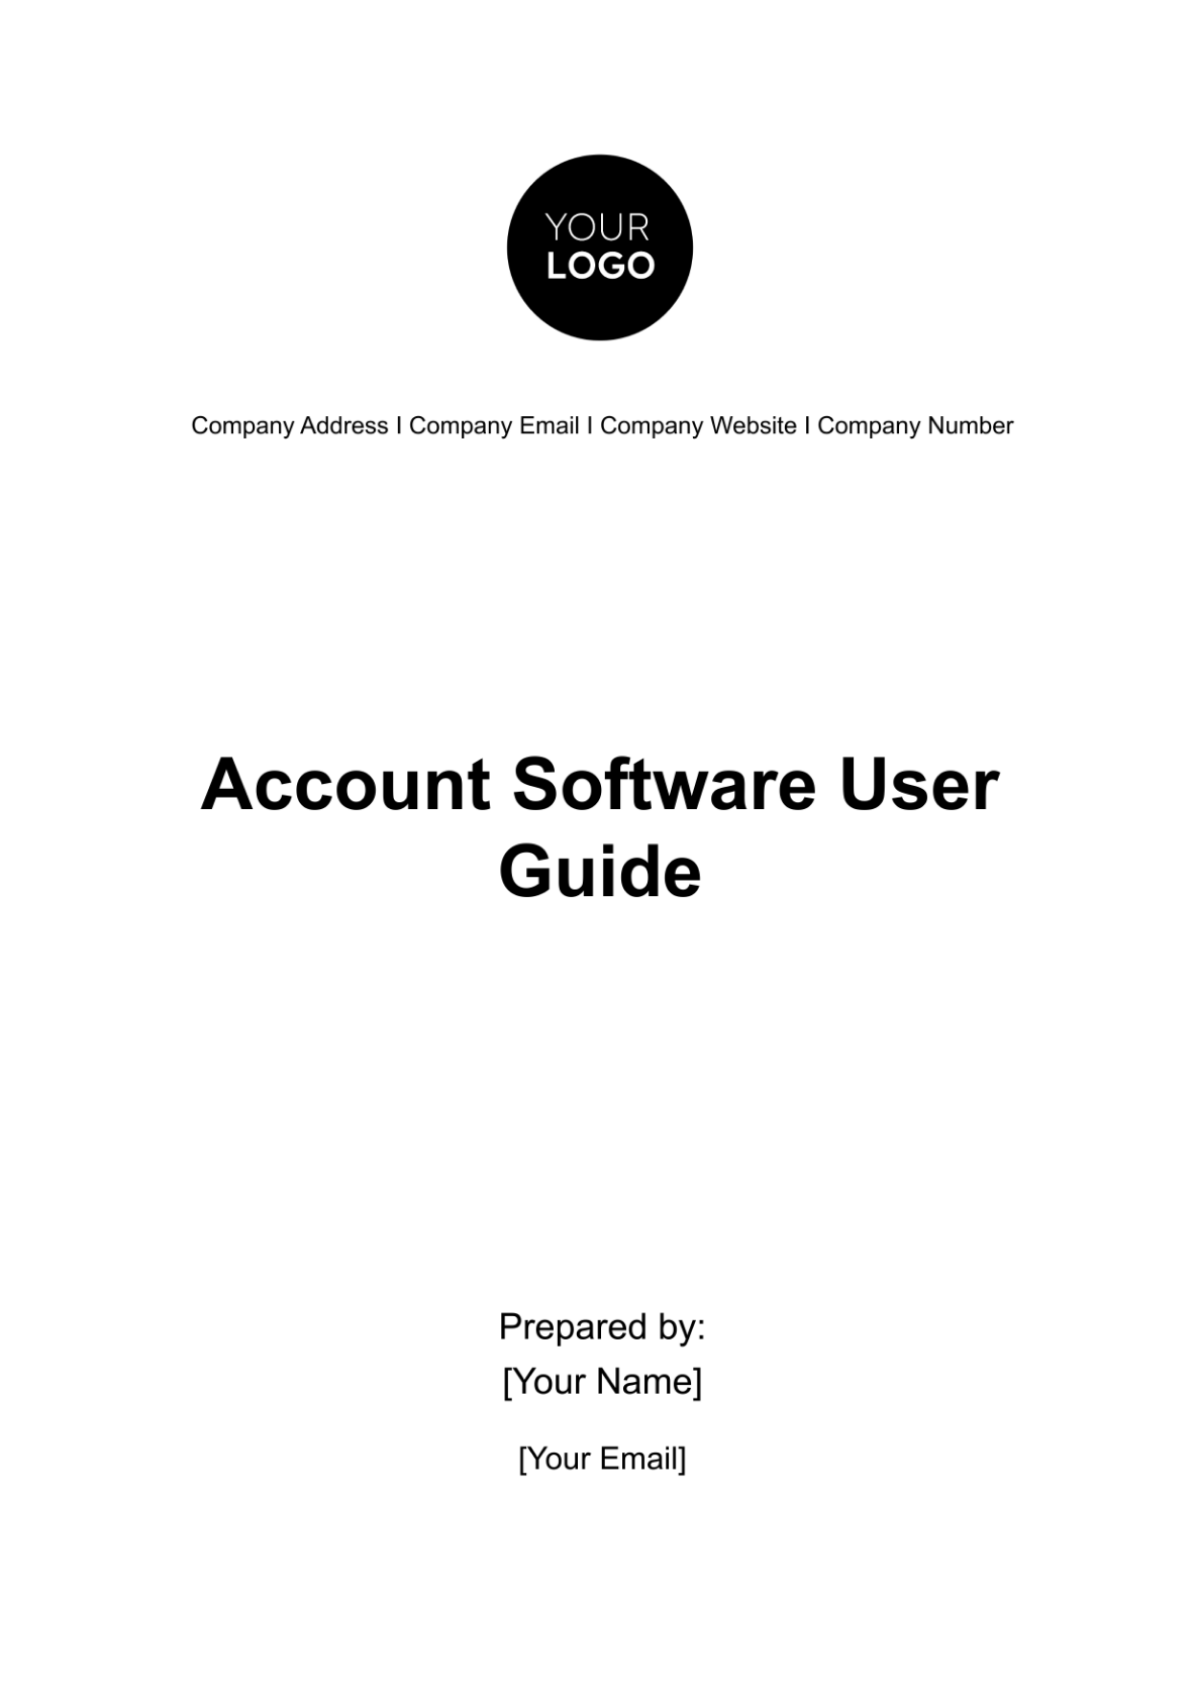 Account Software User Guide Template